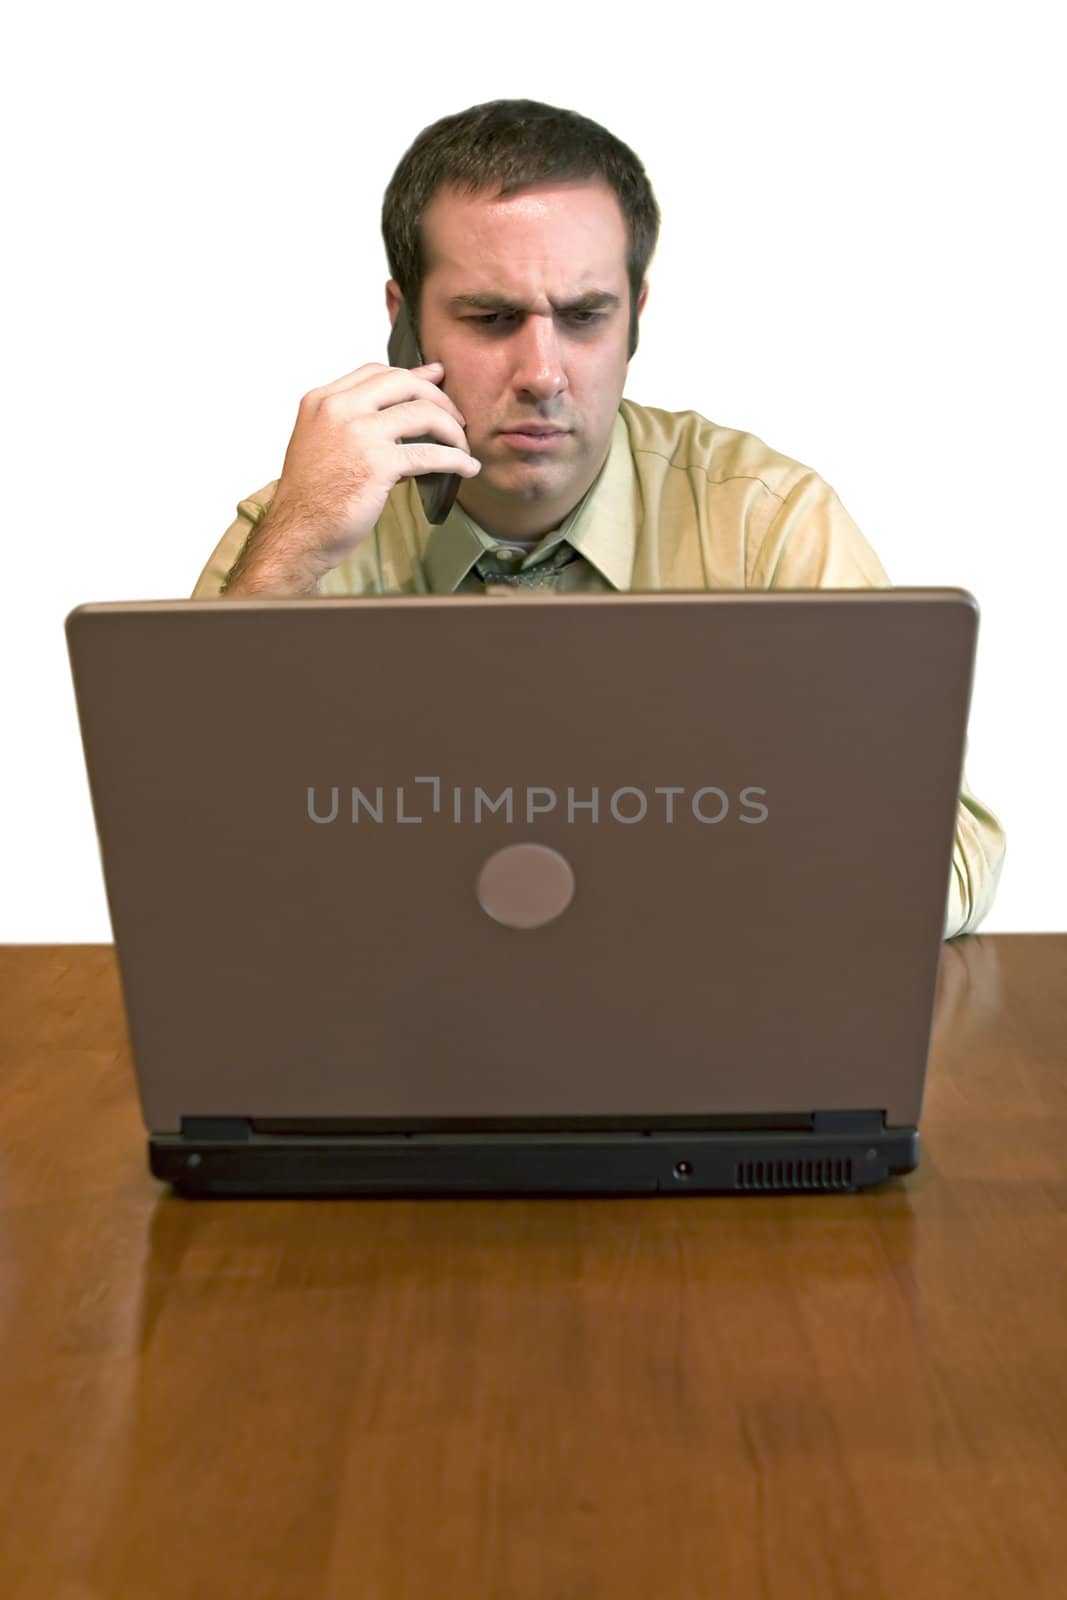 A man working from home with his cell phone and laptop. He has an upset or serious look on his face.